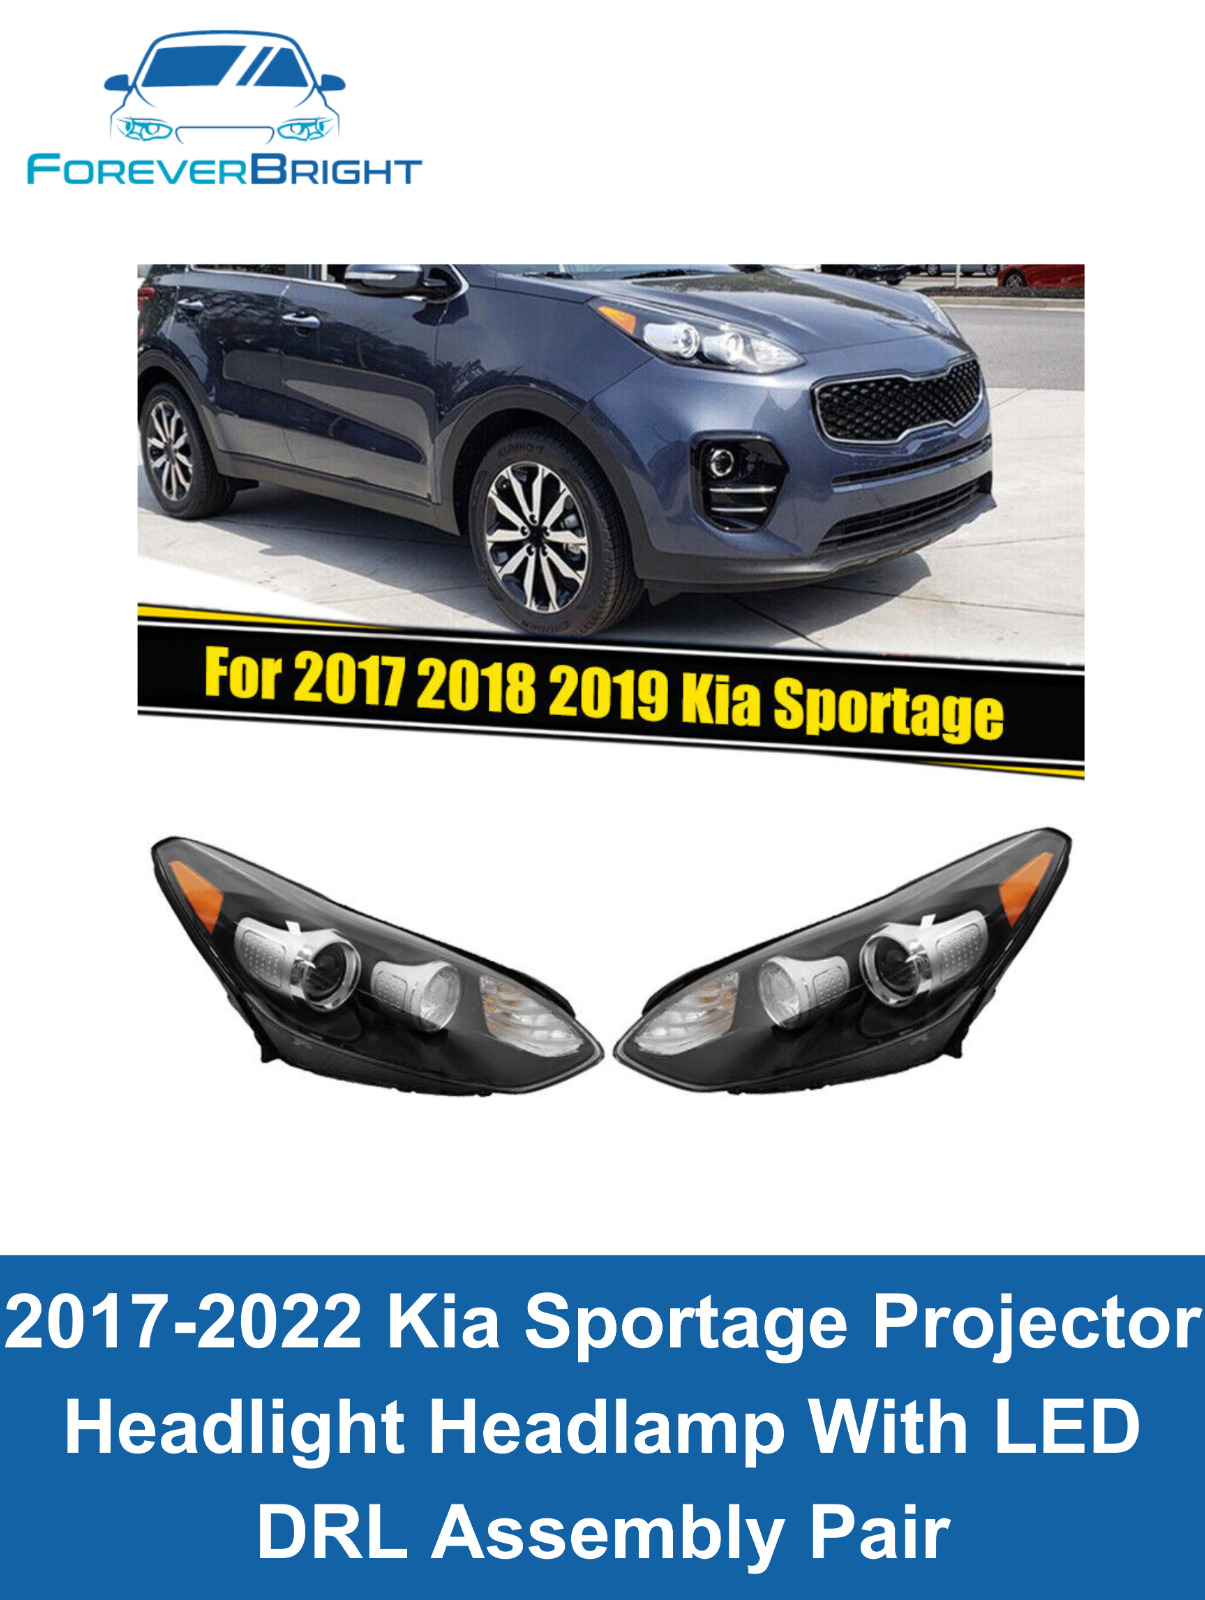 2017-2022 Kia Sportage Projector Headlight Headlamp With LED DRL Assembly Pair